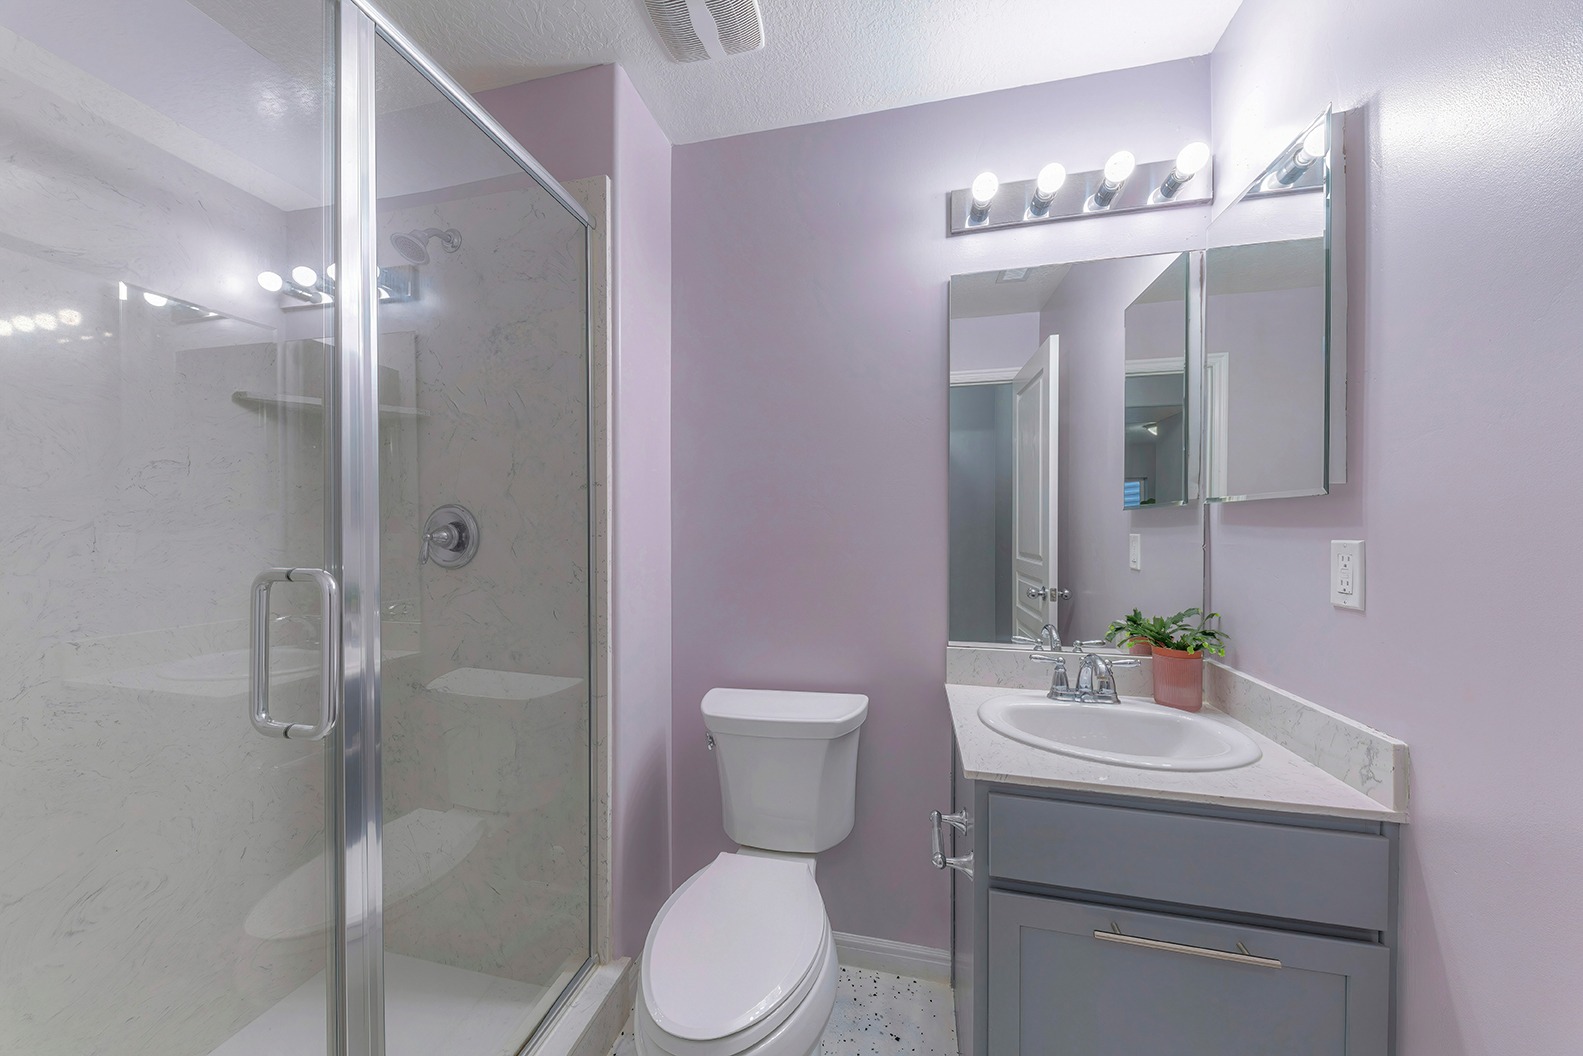 Small traditional bathroom interior with toilet, vanity sink, and shower stall. Bathroom interior with shower with glass wall and door near the toilet bowl beside the sink with mirror on the left.